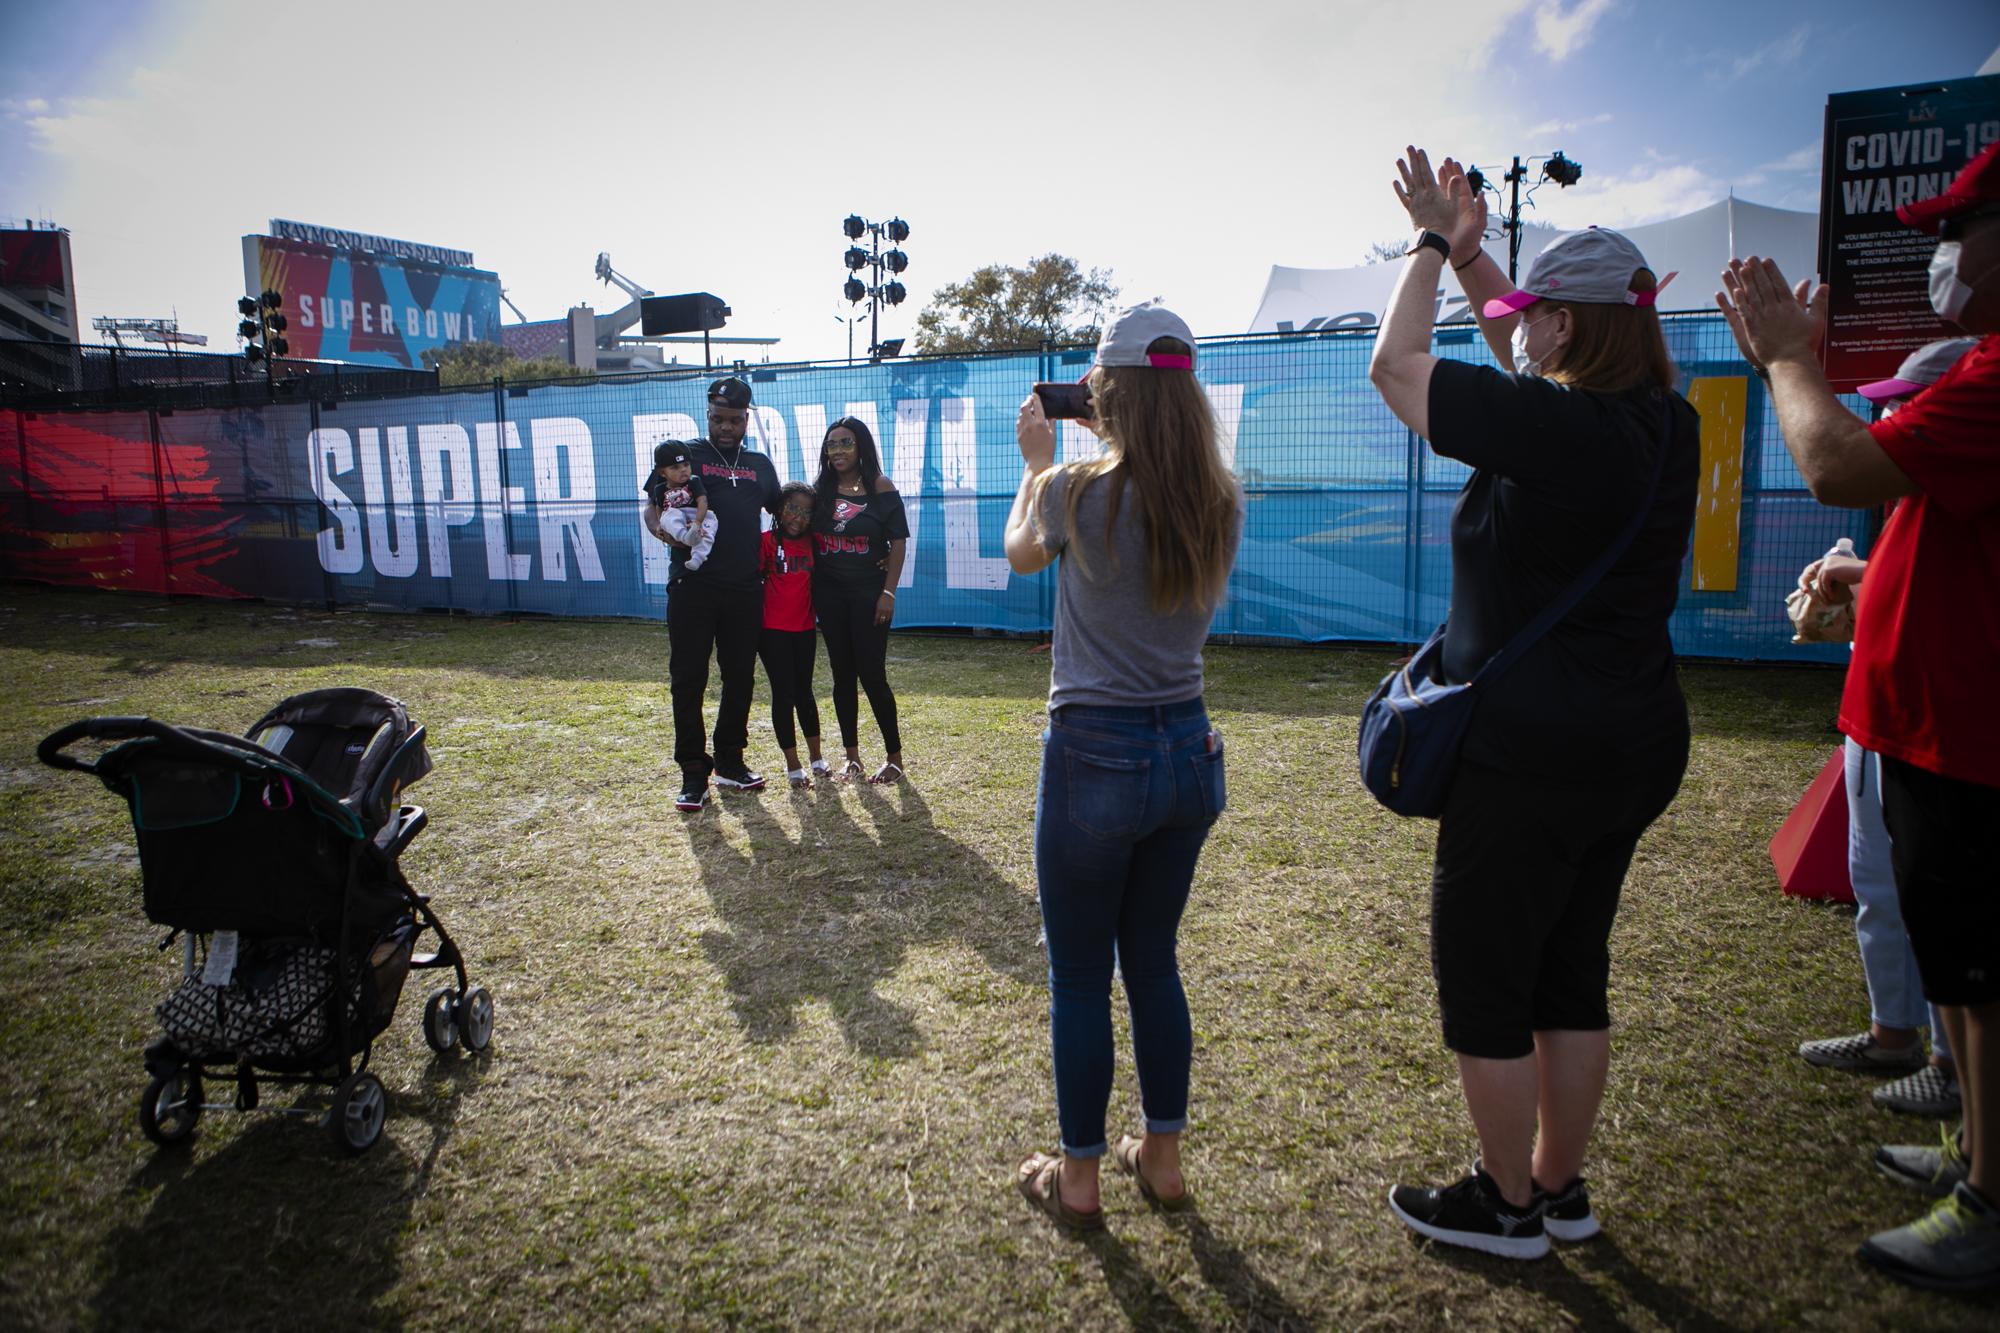 FLORIDA, USA - FEBRUARY 06: Fans pose for a photo outside Raymond James Stadium a day before the Super Bowl LV, in Tampa, Florida, United States on February 06, 2021.